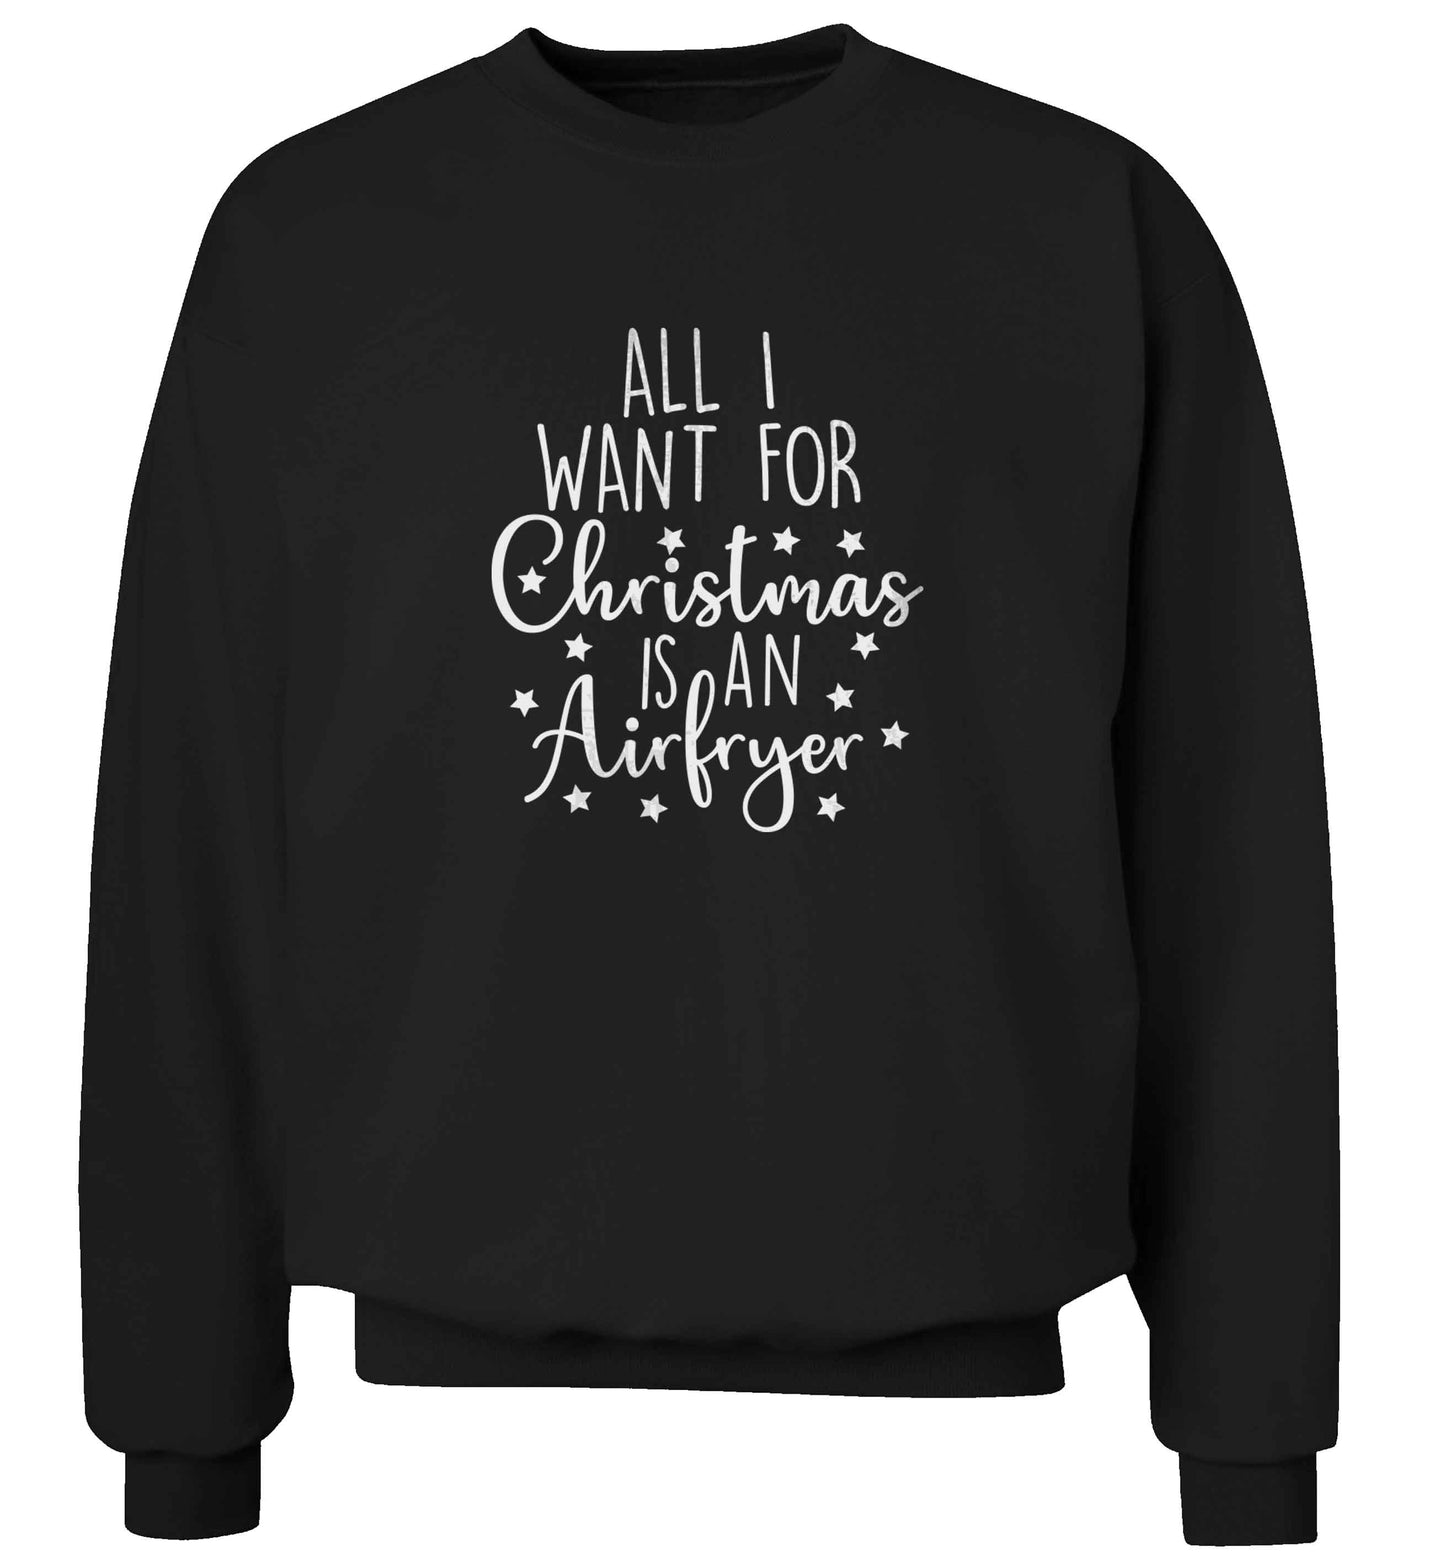 All I want for Christmas is an airfryeradult's unisex black sweater 2XL